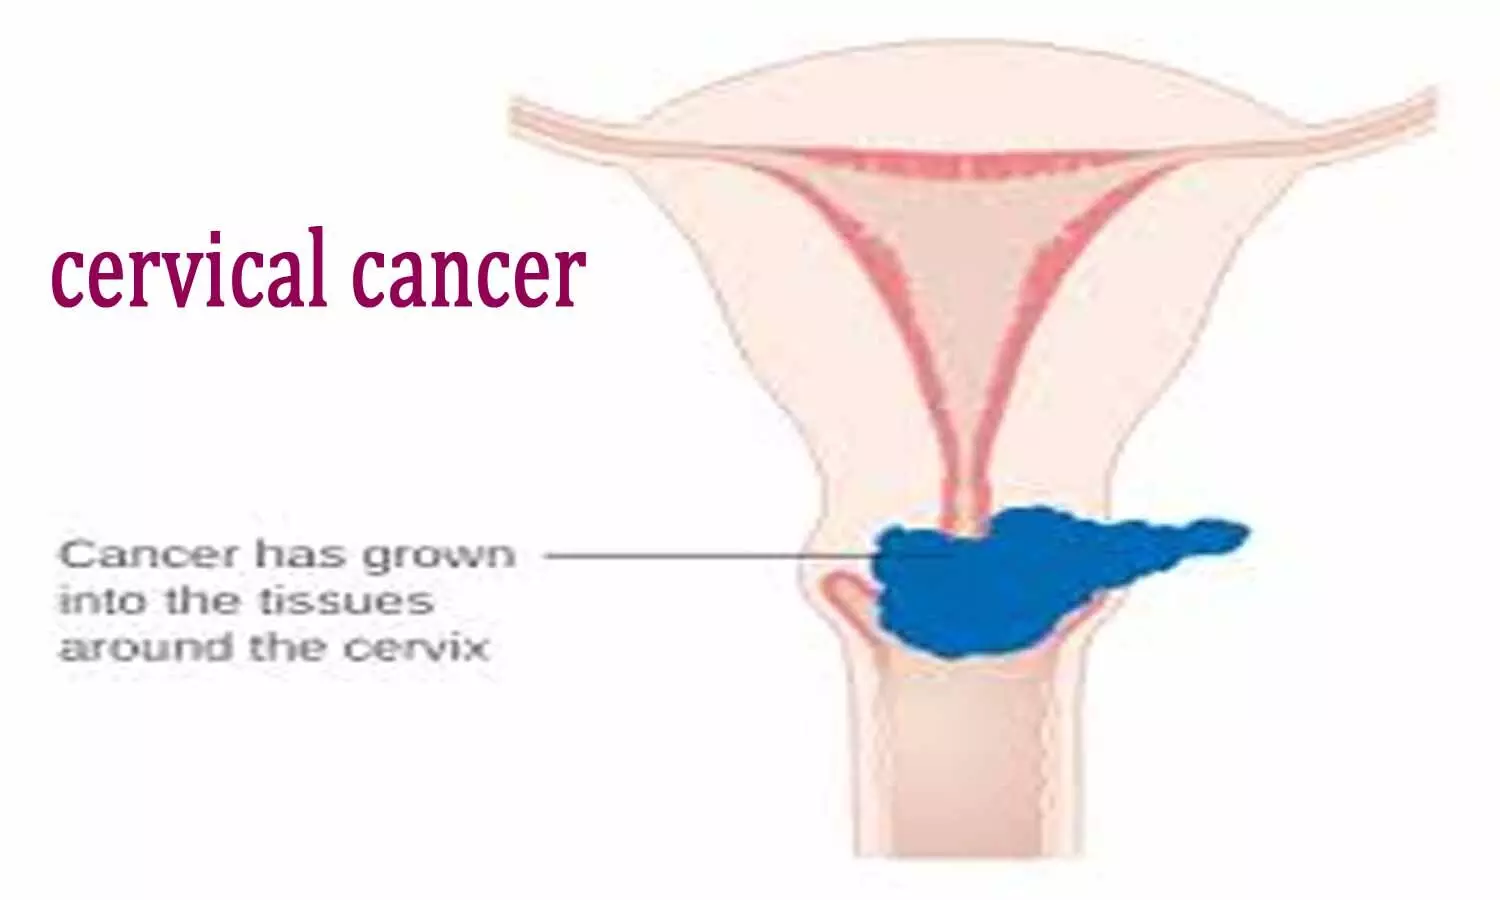 Open surgery superior to minimally invasive surgery for early cervical cancer